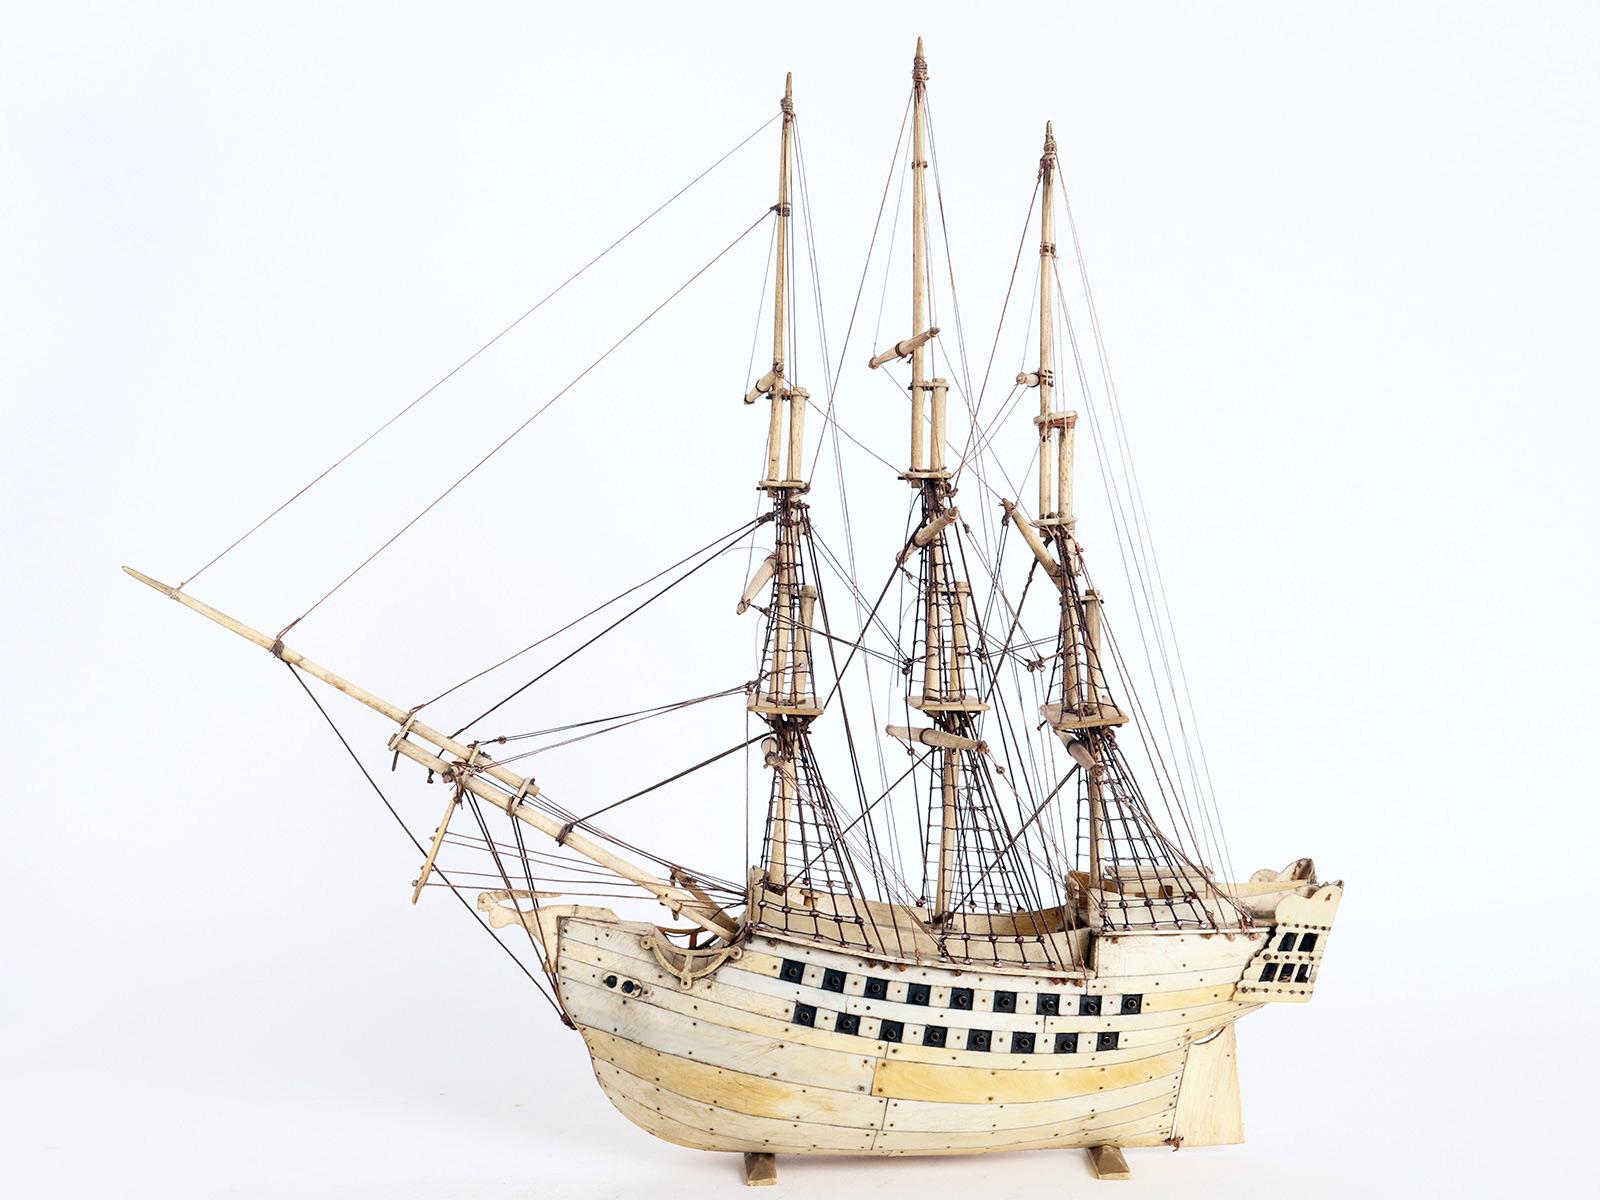 A British model of a sailing ship, made out of bone. Made by French prisoners of war (POWs), held in British prisons, during the Napoleonic Wars, which took place from 1793 to 1815 and the following years. Prisoner of War Models, as model ships like